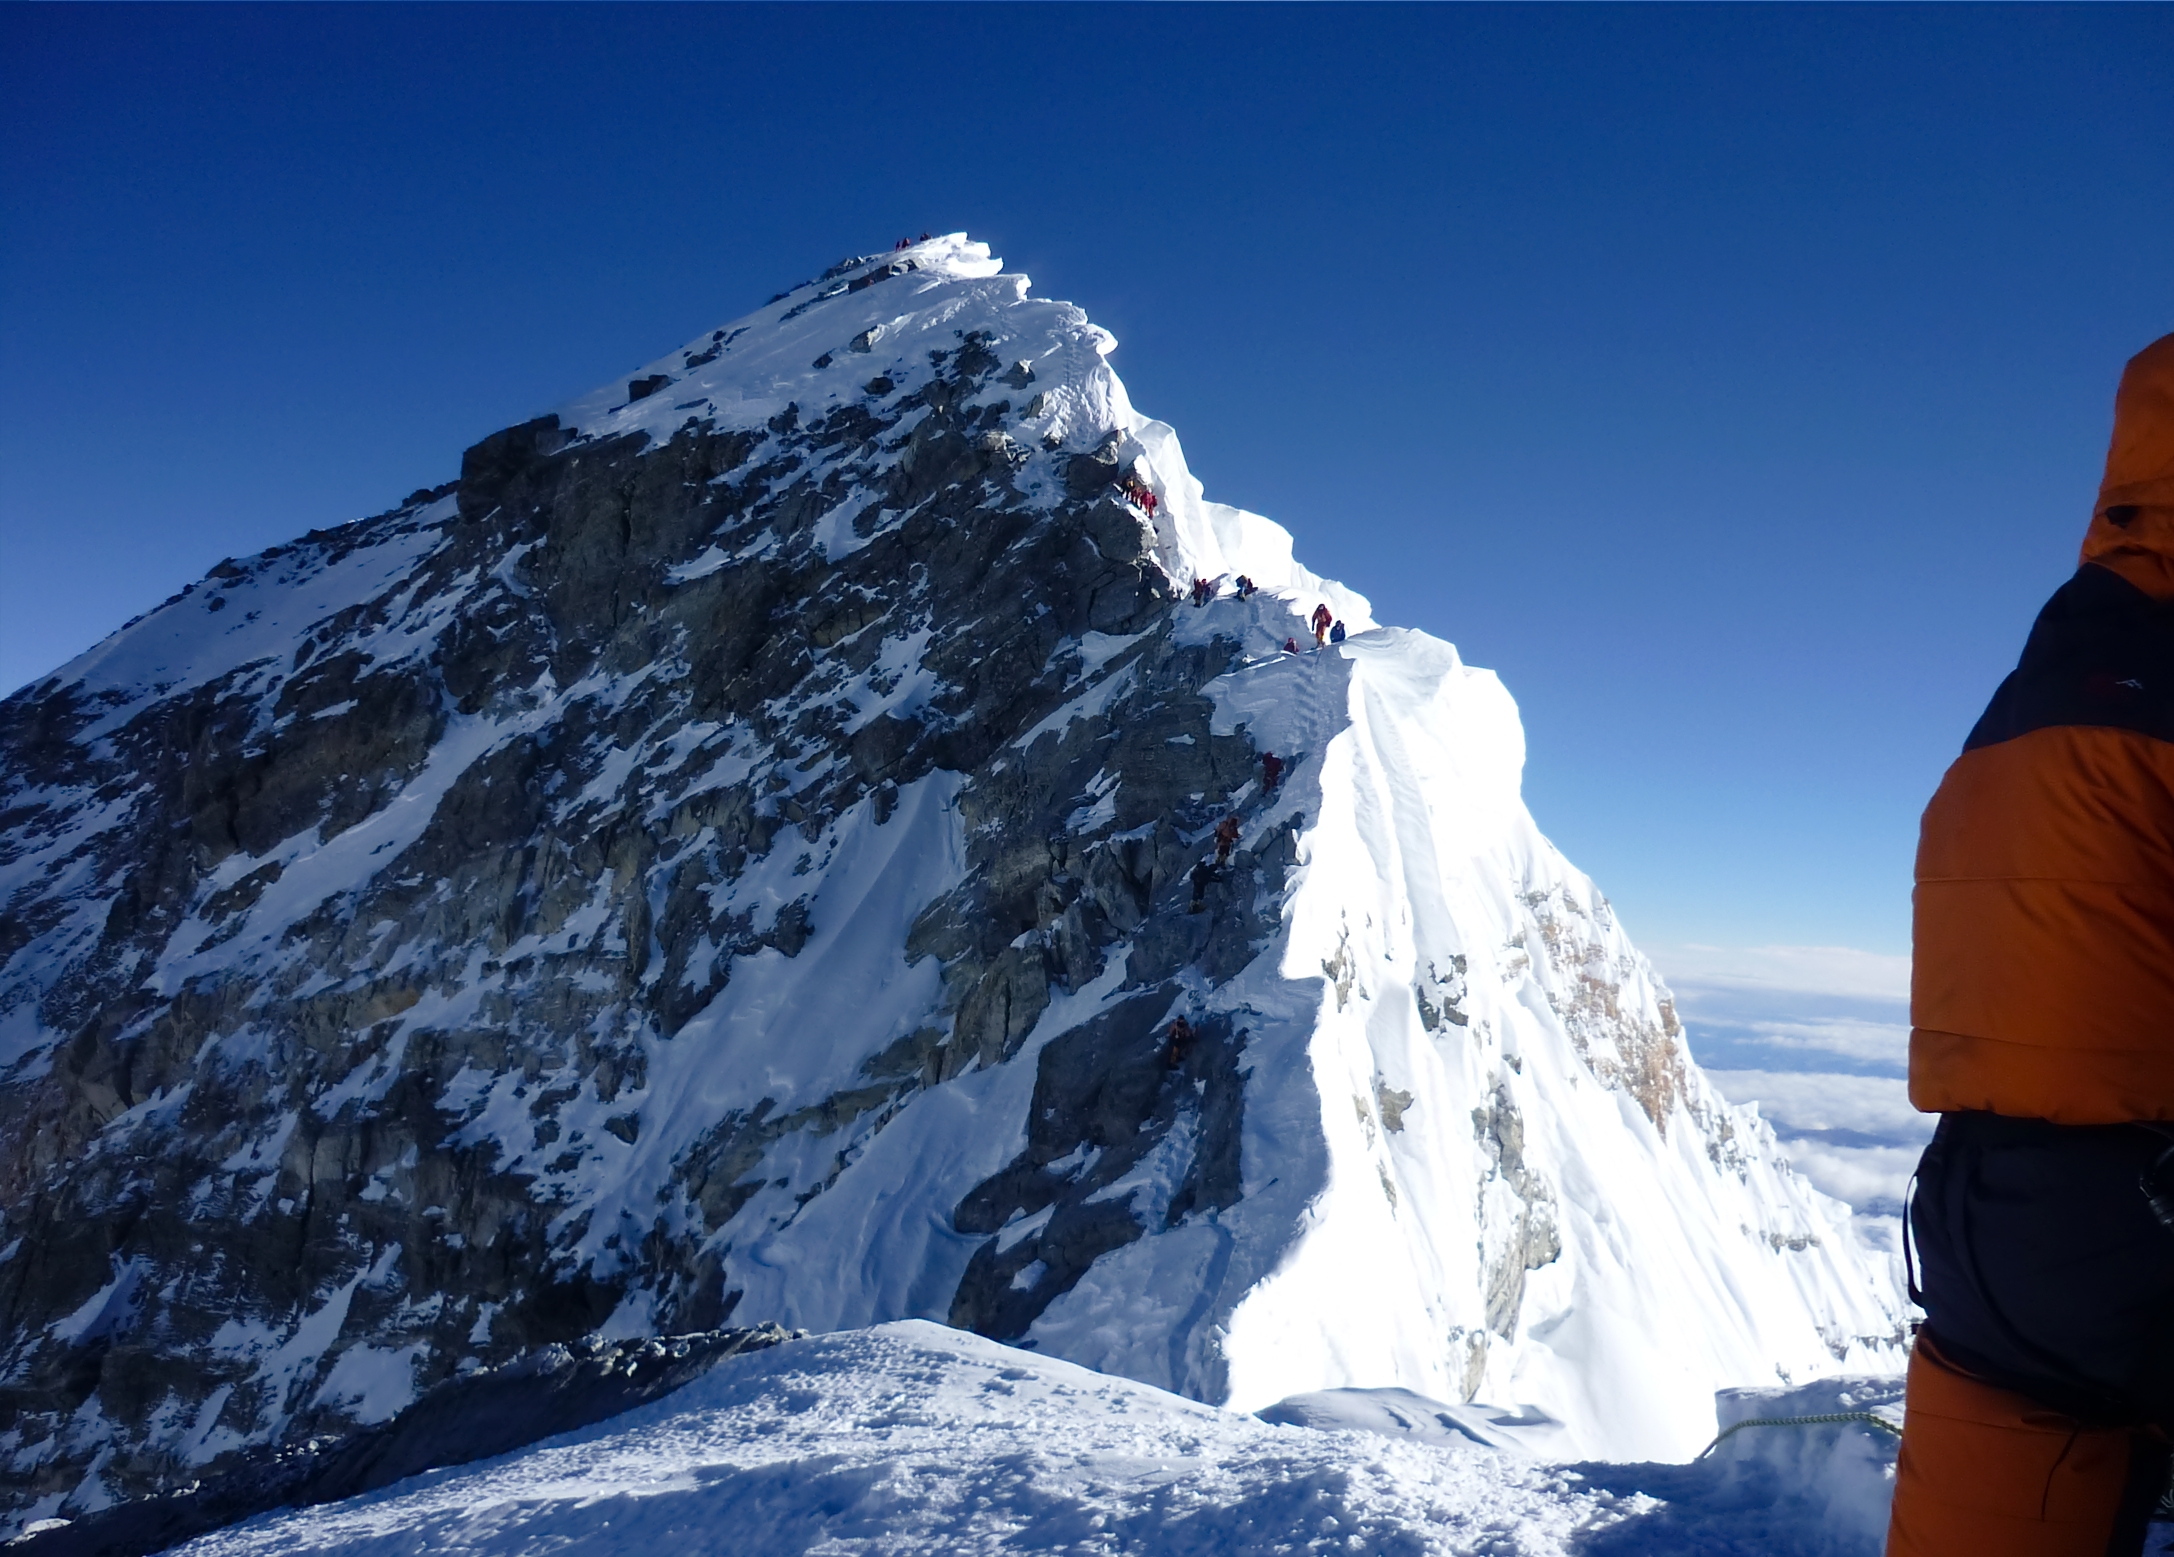 The Himalayan peak off limits to climbers